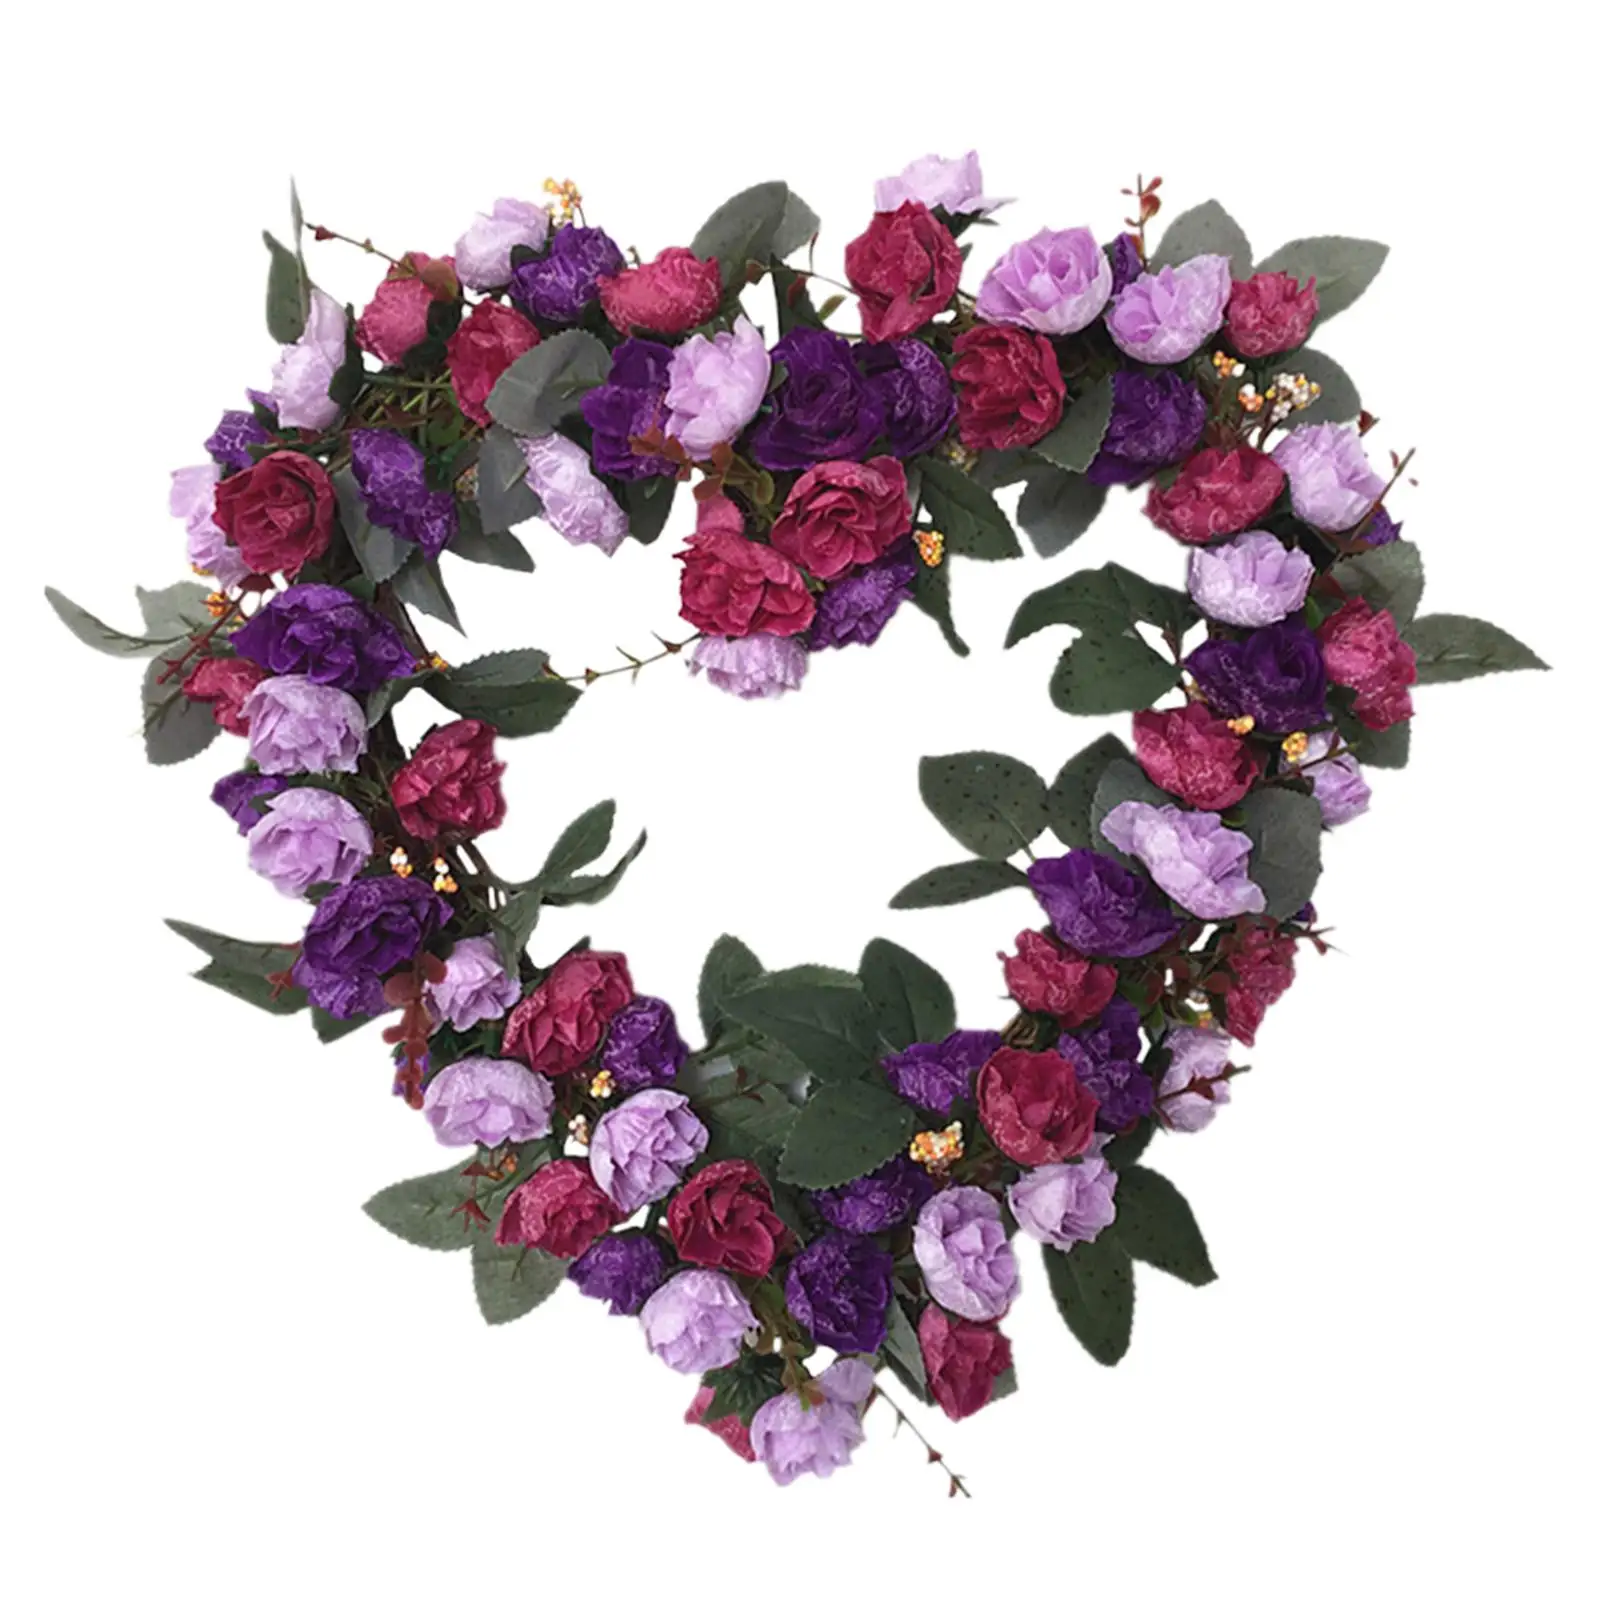 Heart-Shaped Rose Wreath Wall Hanging, Simulation Knocker Welcome 36cm Garland for Party Yard Home Living Room Ornament